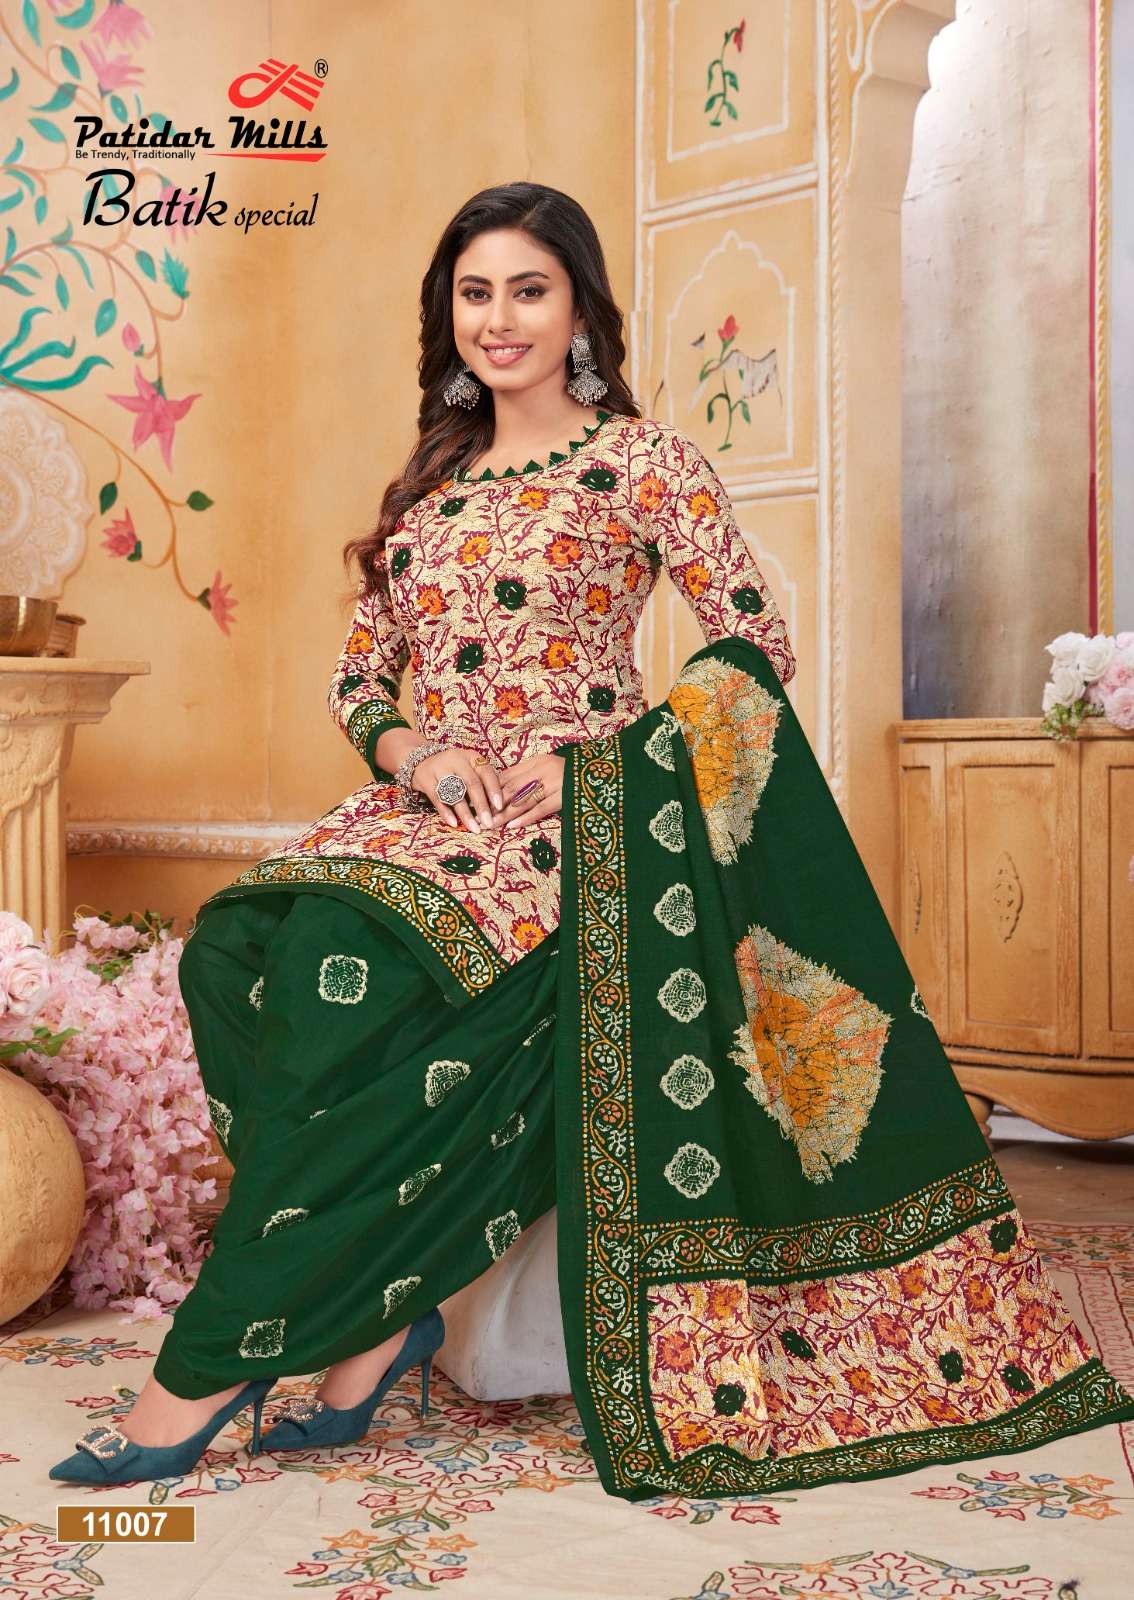 Batik Special Vol-11 By Patidar Mills 11001 To 11010 Series Beautiful Stylish Pakistani Suits Fancy Colorful Casual Wear & Ethnic Wear & Ready To Wear Pure Cotton Print Dresses At Wholesale Price